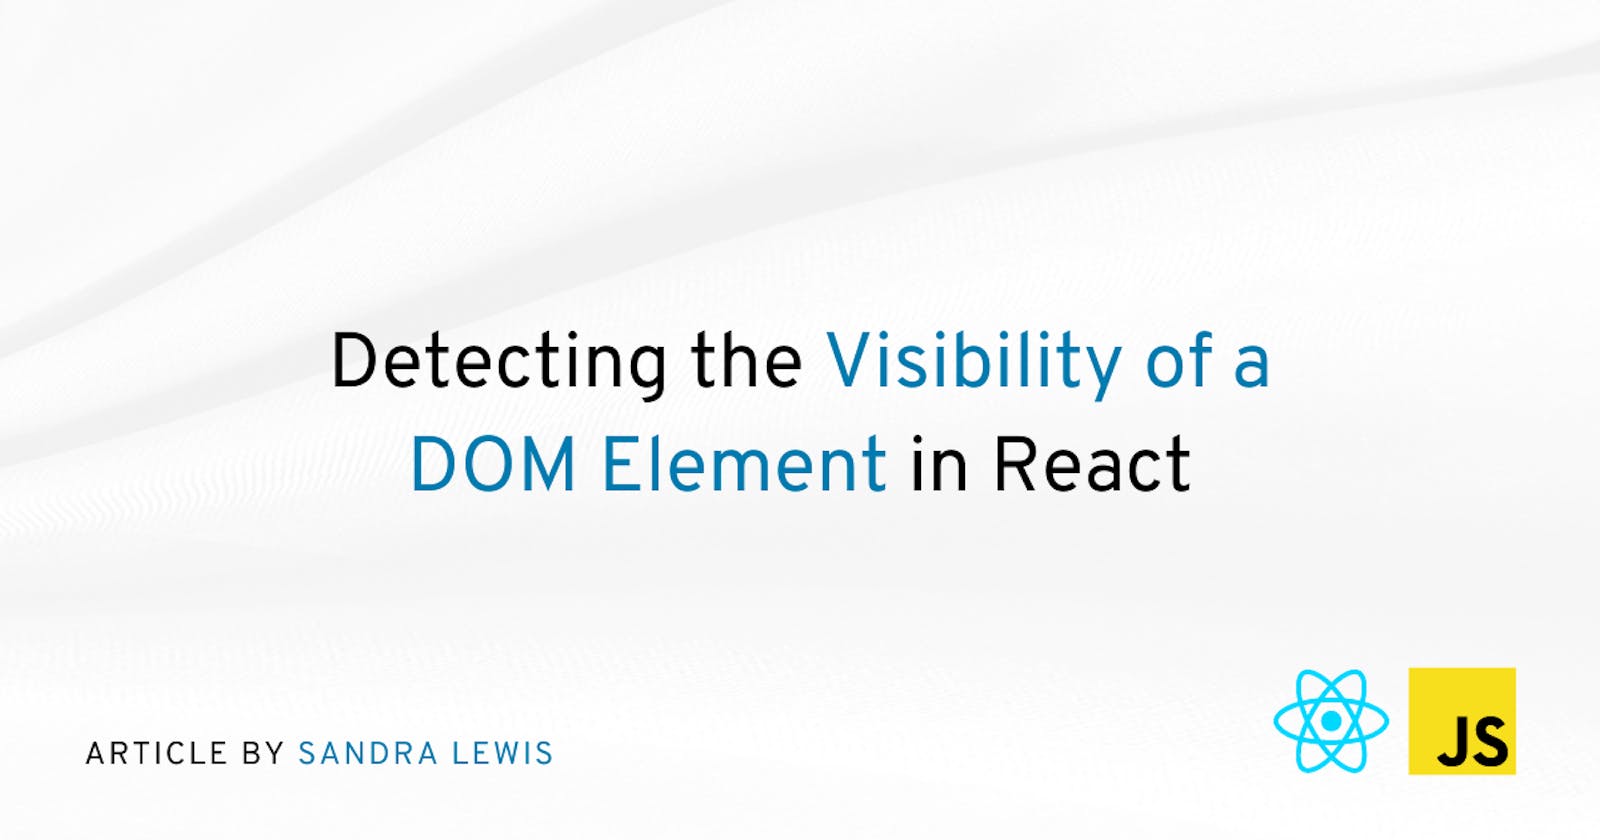 Detecting the Visibility of a DOM Element in React